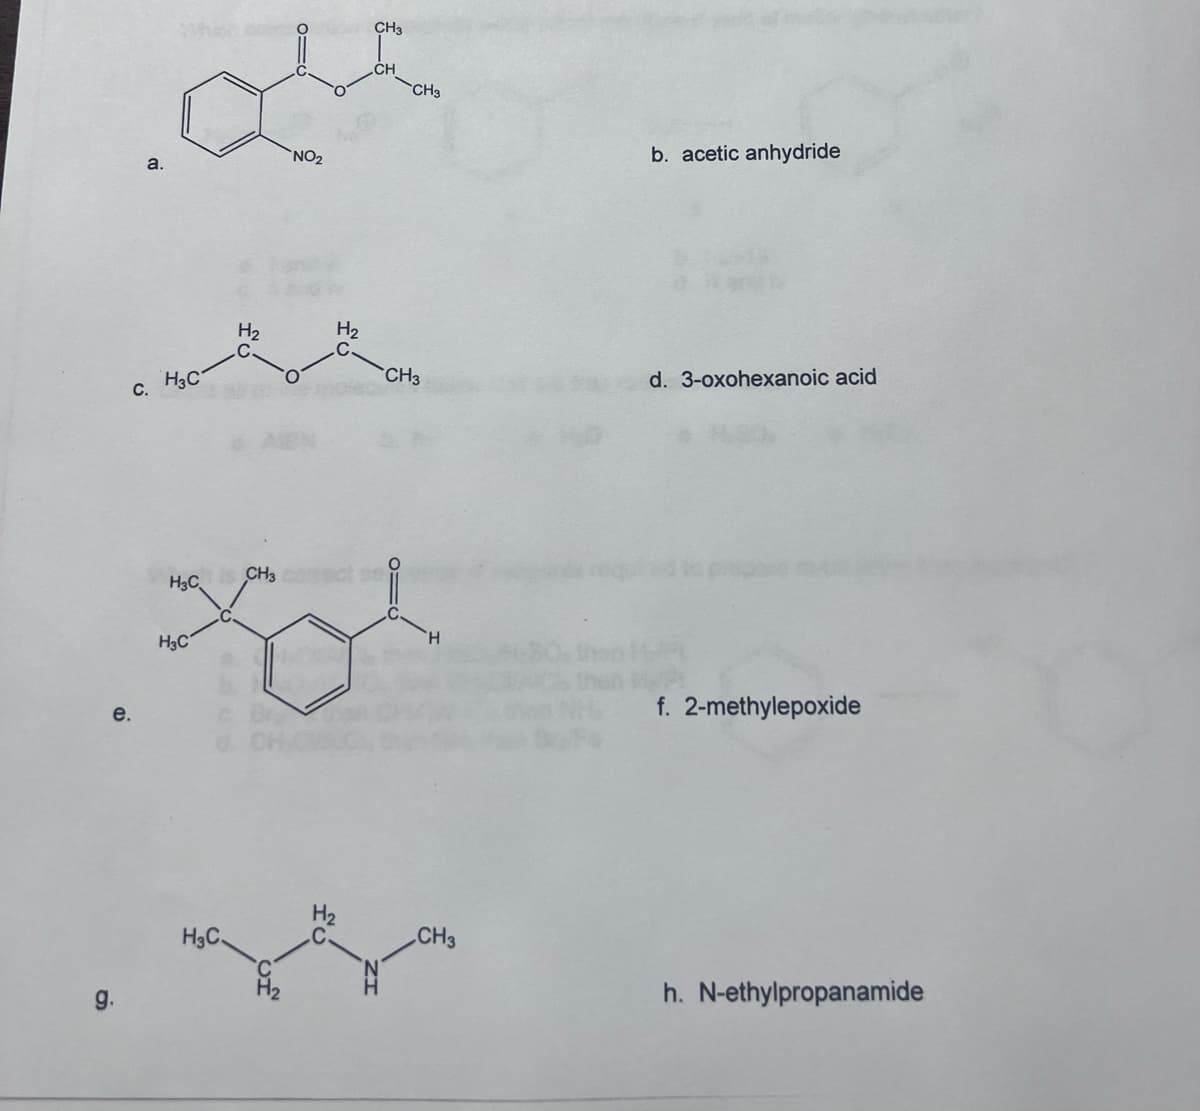 e.
g.
a.
C.
H3C
H3C
H3C
H₂
C.
H3C
O
NO₂
H₂
CH3
CH3
Xo
CH
CH3
CH3
H
CH3
b. acetic anhydride
d. 3-oxohexanoic acid
f. 2-methylepoxide
h. N-ethylpropanamide